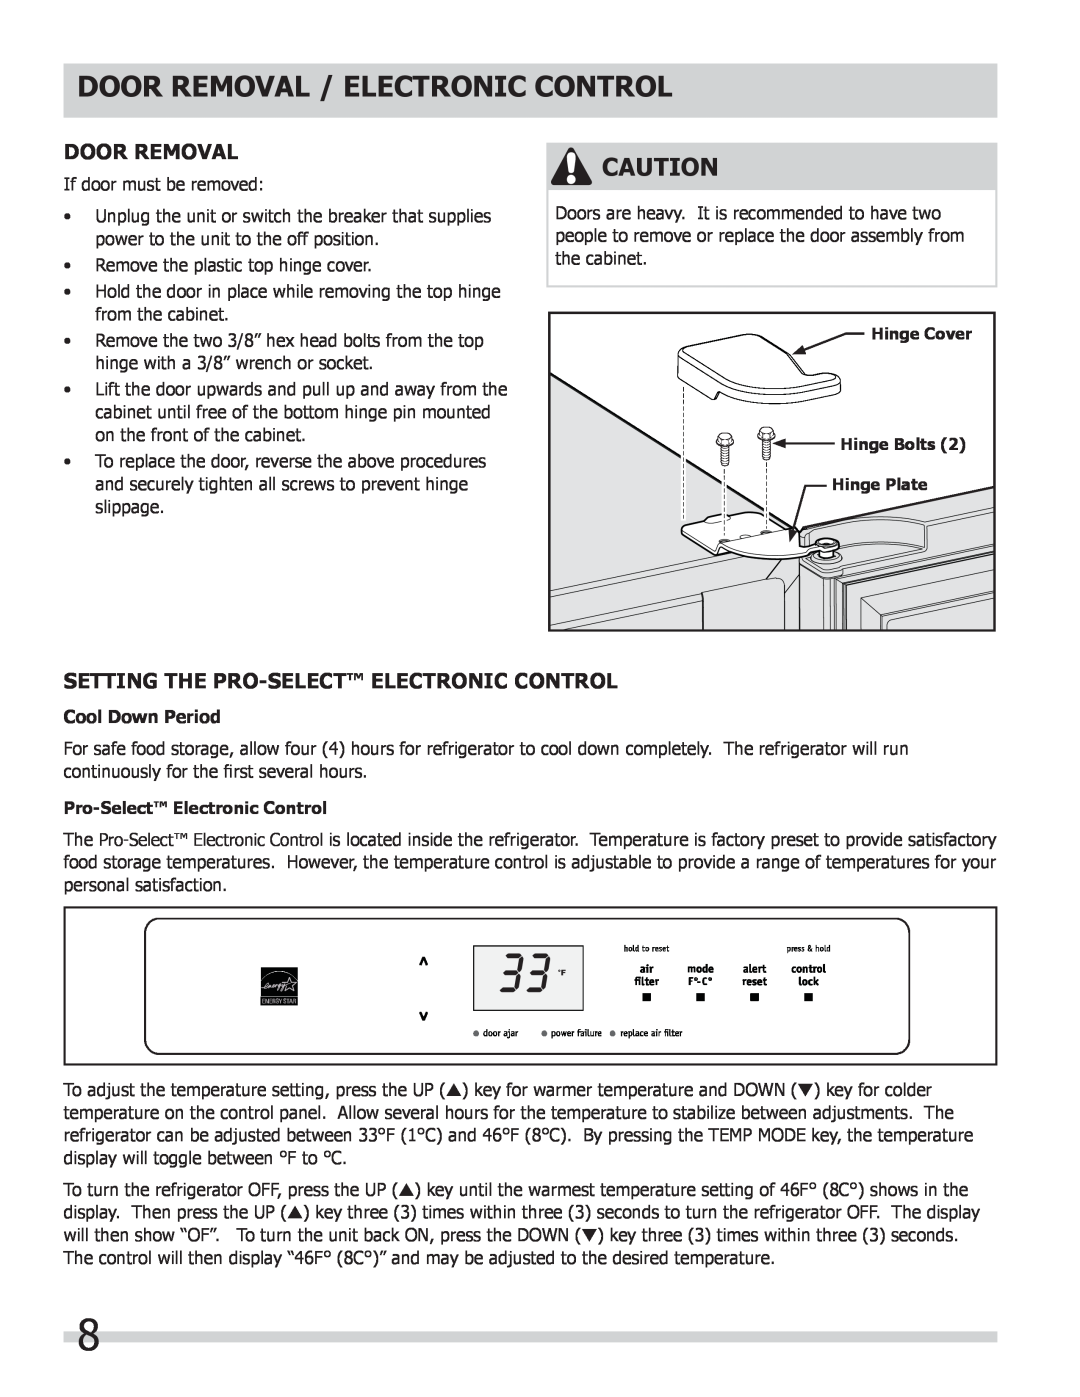 Frigidaire 297298700, FPRH19D7LF manual Door Removal / Electronic Control, Setting The Pro-Select Electronic Control 